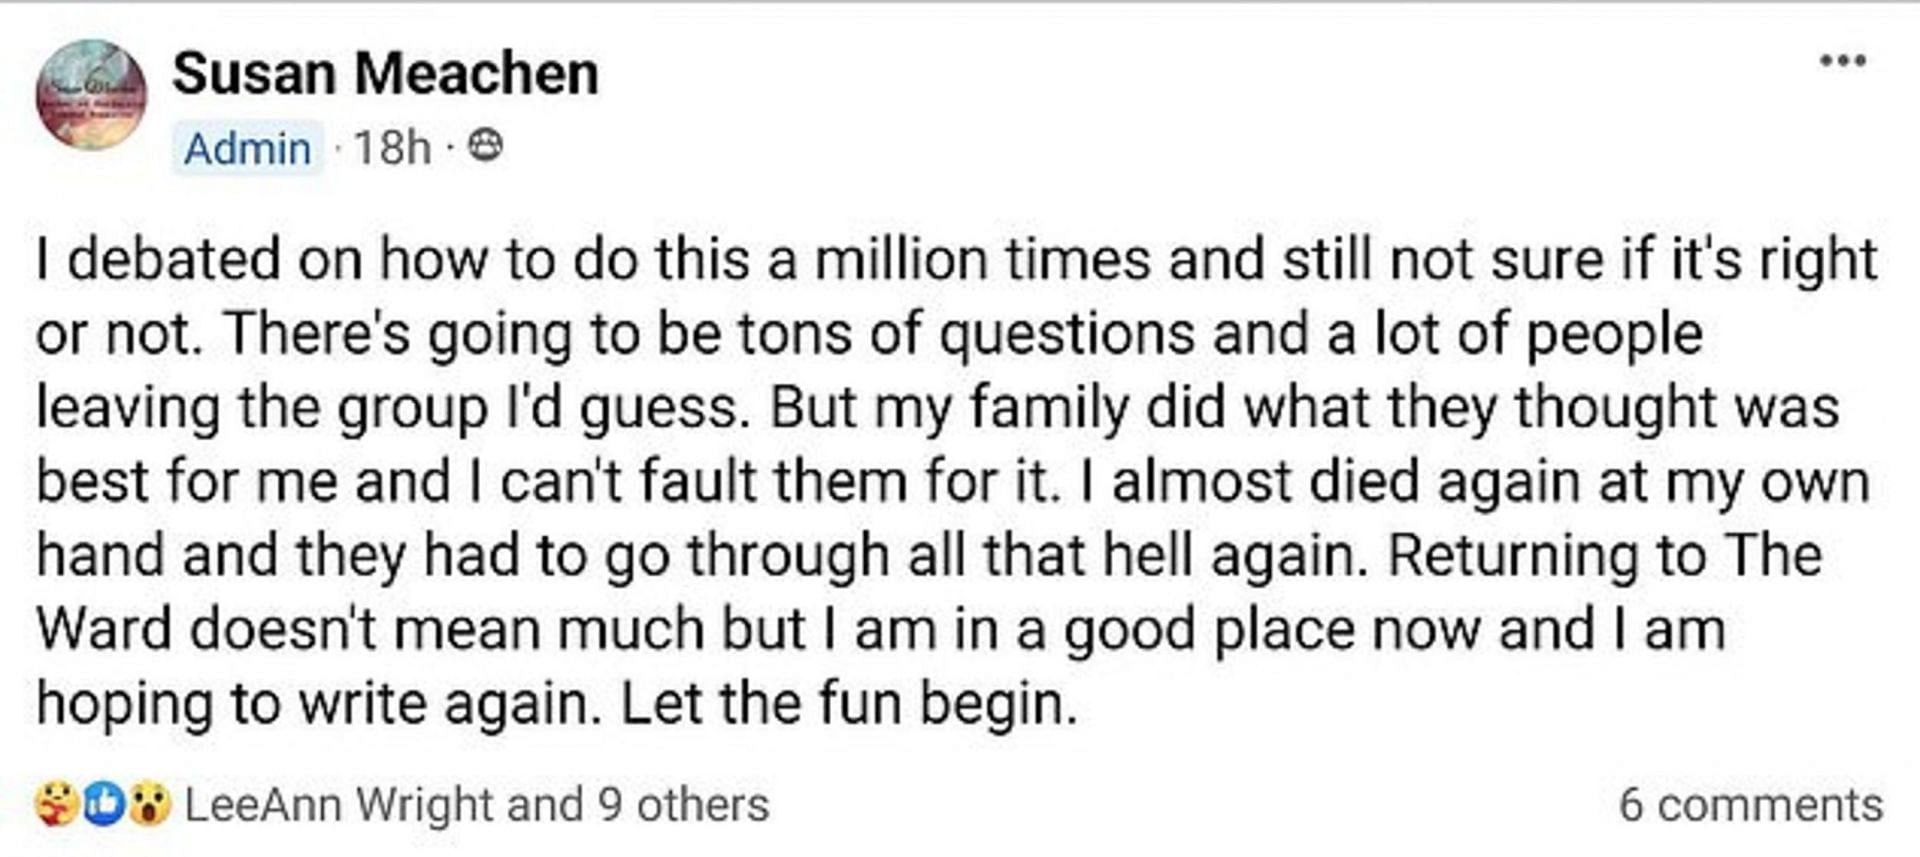 Susan Meachen announces she is very much alive in Facebook post (Image via Facebook)